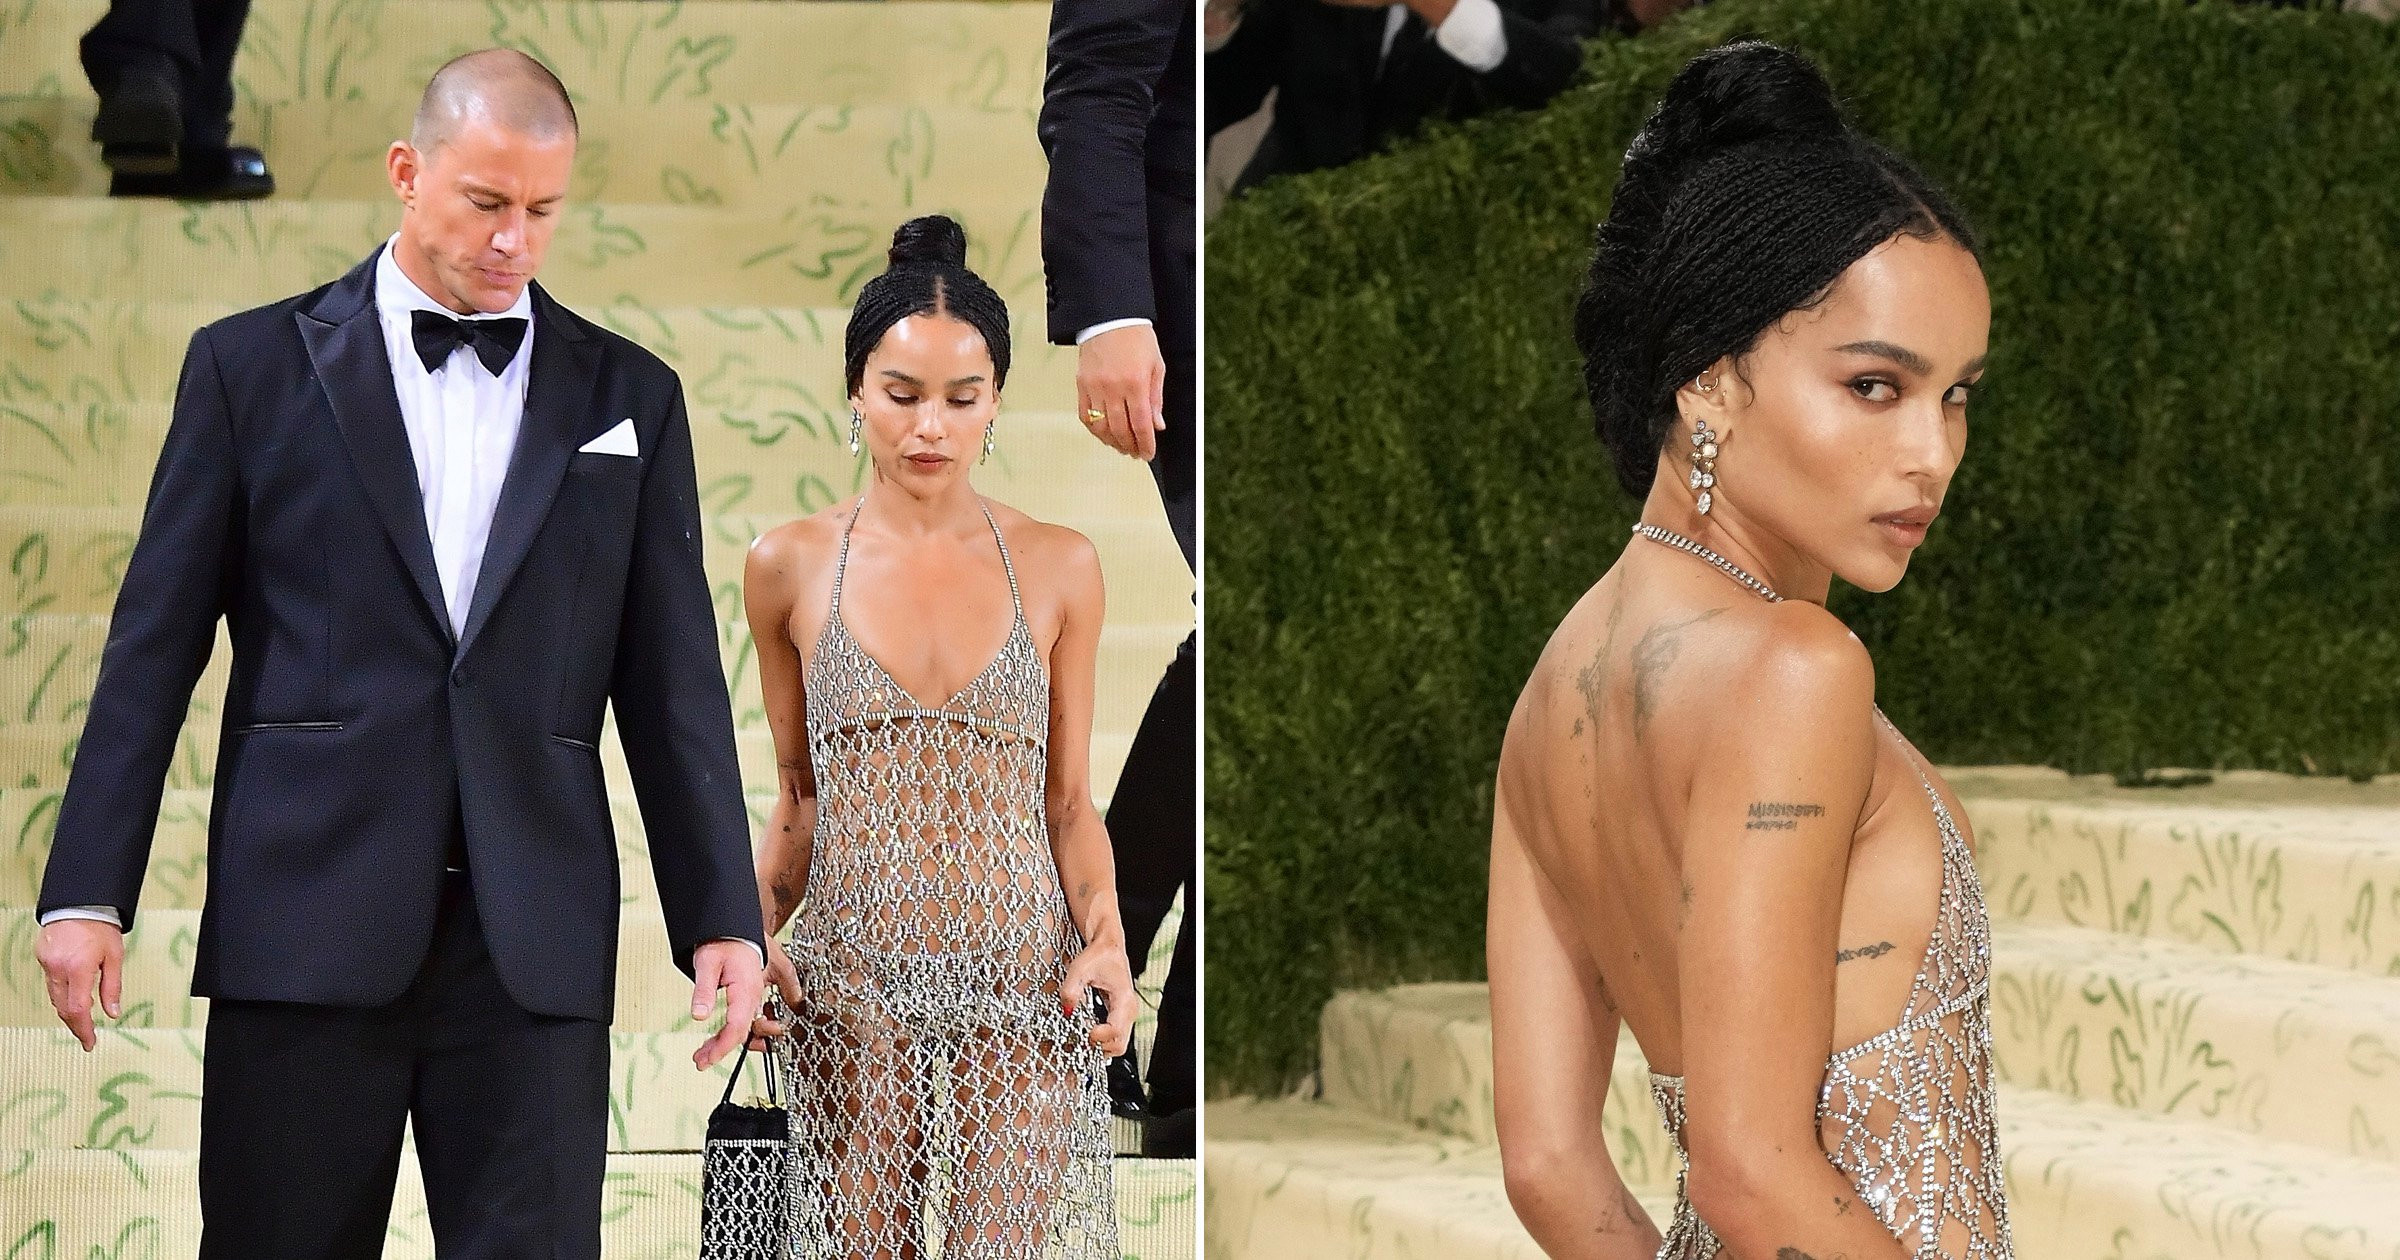 Met Gala 2021: Rumoured couple Zoe Kravitz and Channing Tatum pictured leaving together after arriving solo